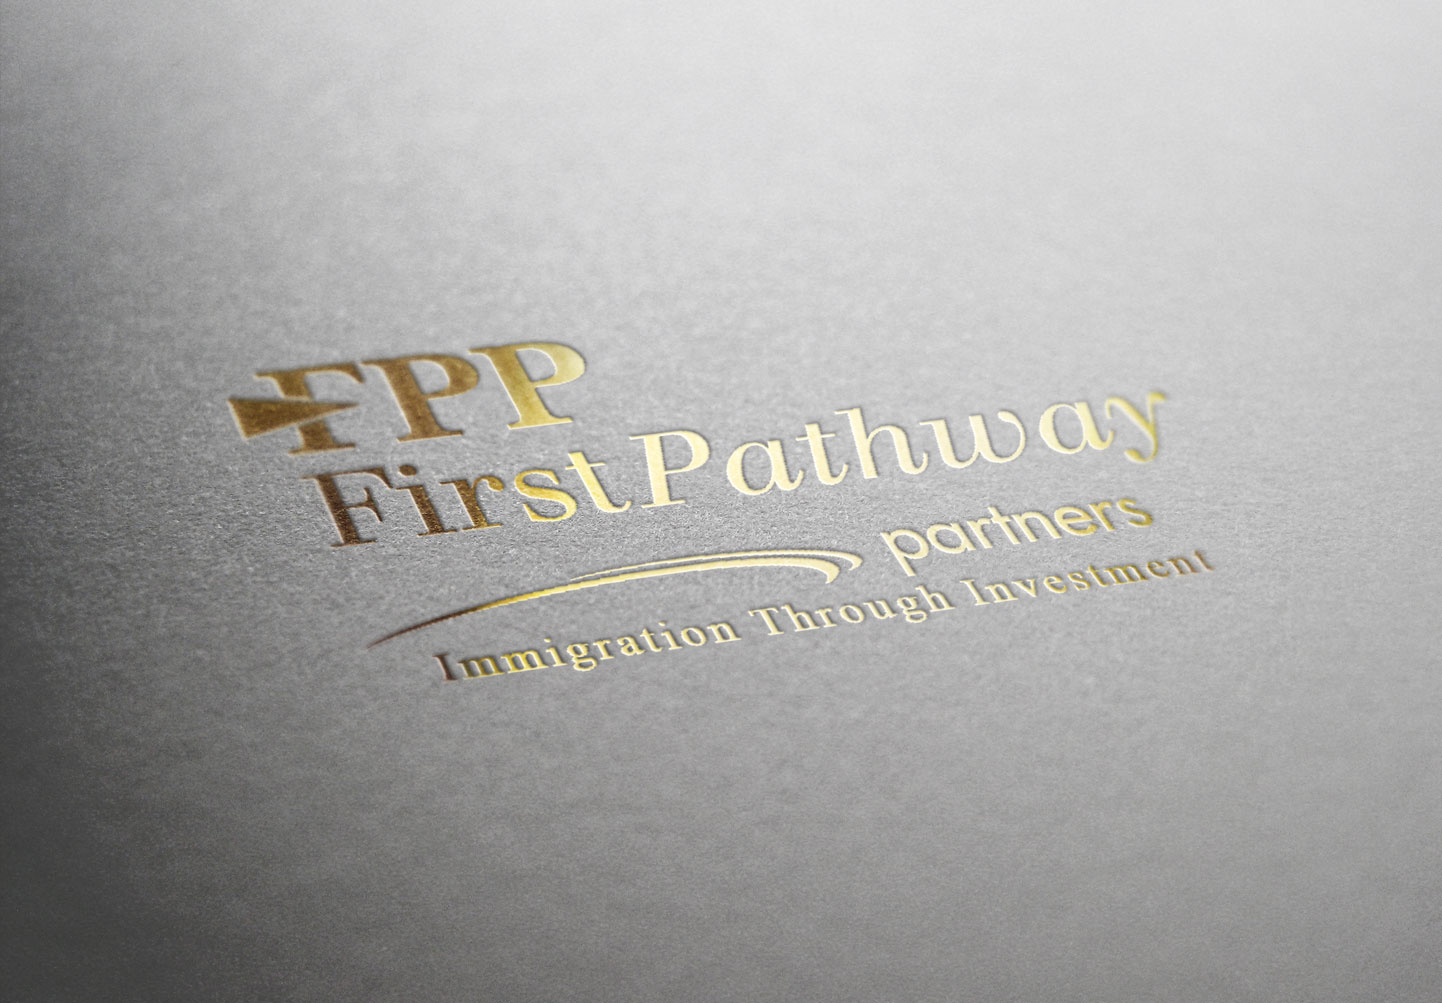 FirstPathway Partners